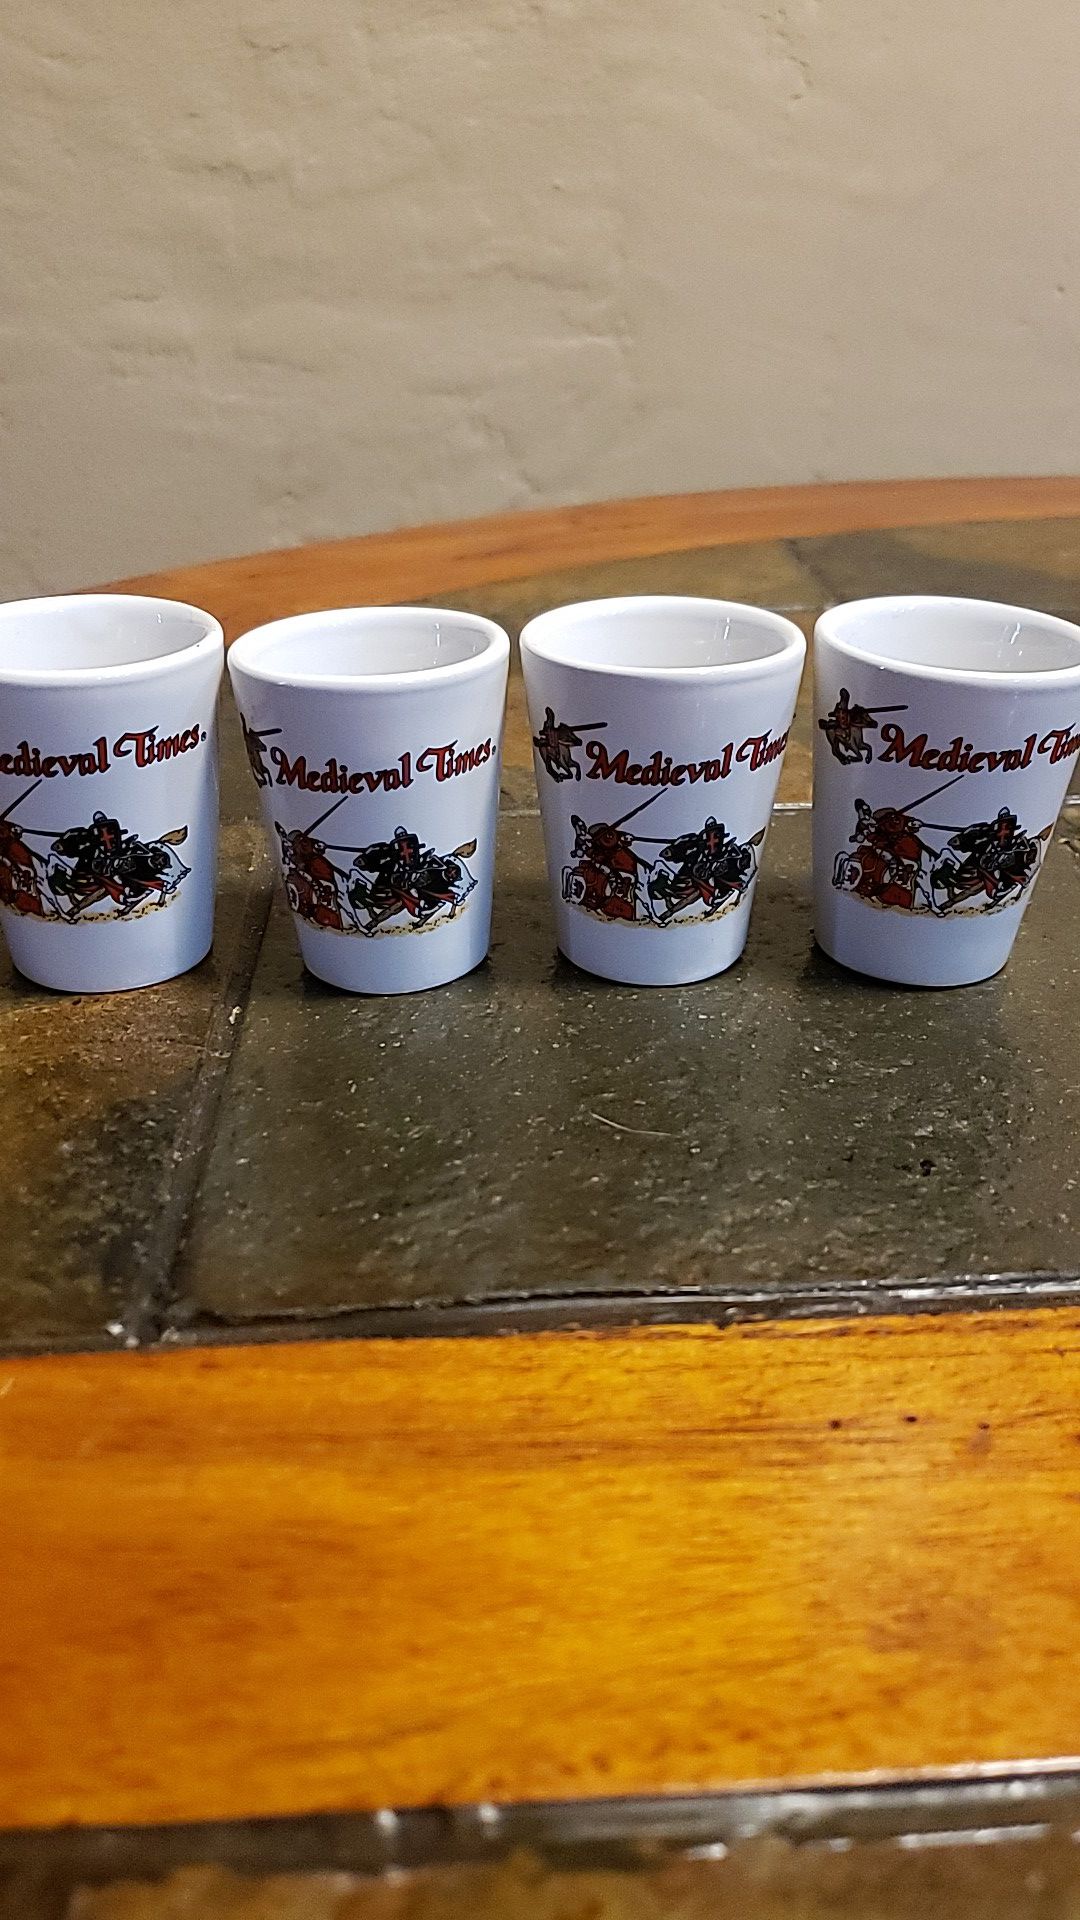 Medieval Times collectible shot glasses - set of 4